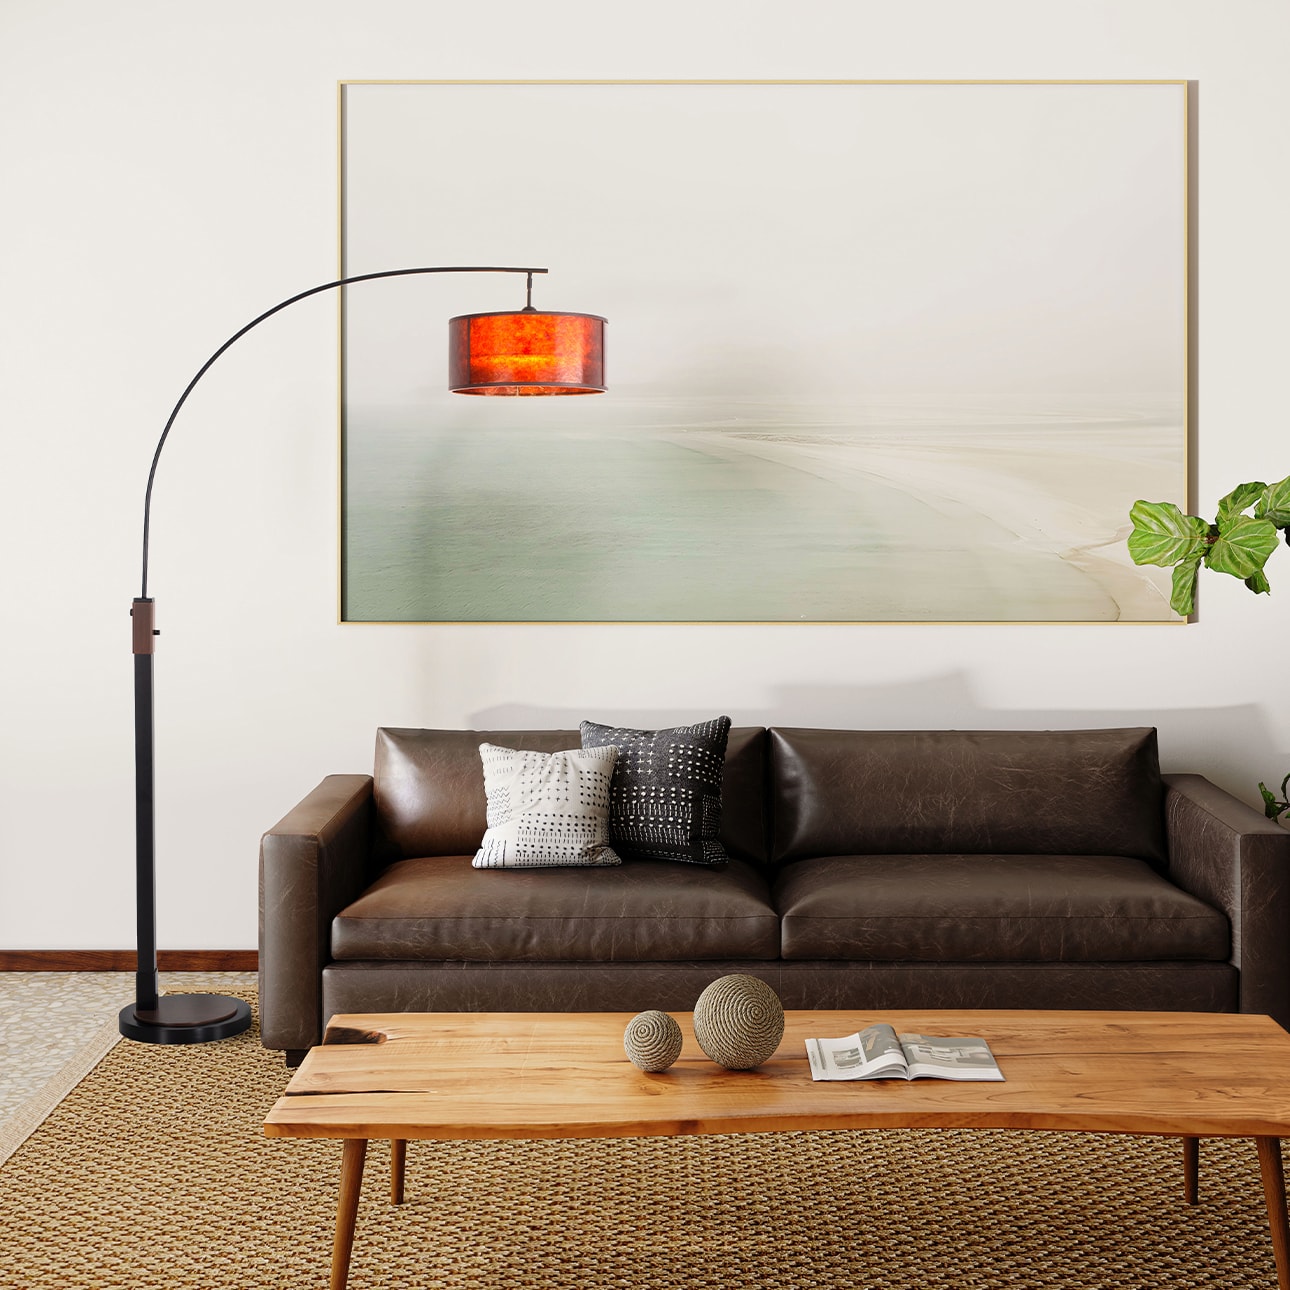 NOVA of California Mica Arc Floor Lamp in Bronze Finish with Amber Mica Shade - Dimmable and Adjustable | 217722 -  237722